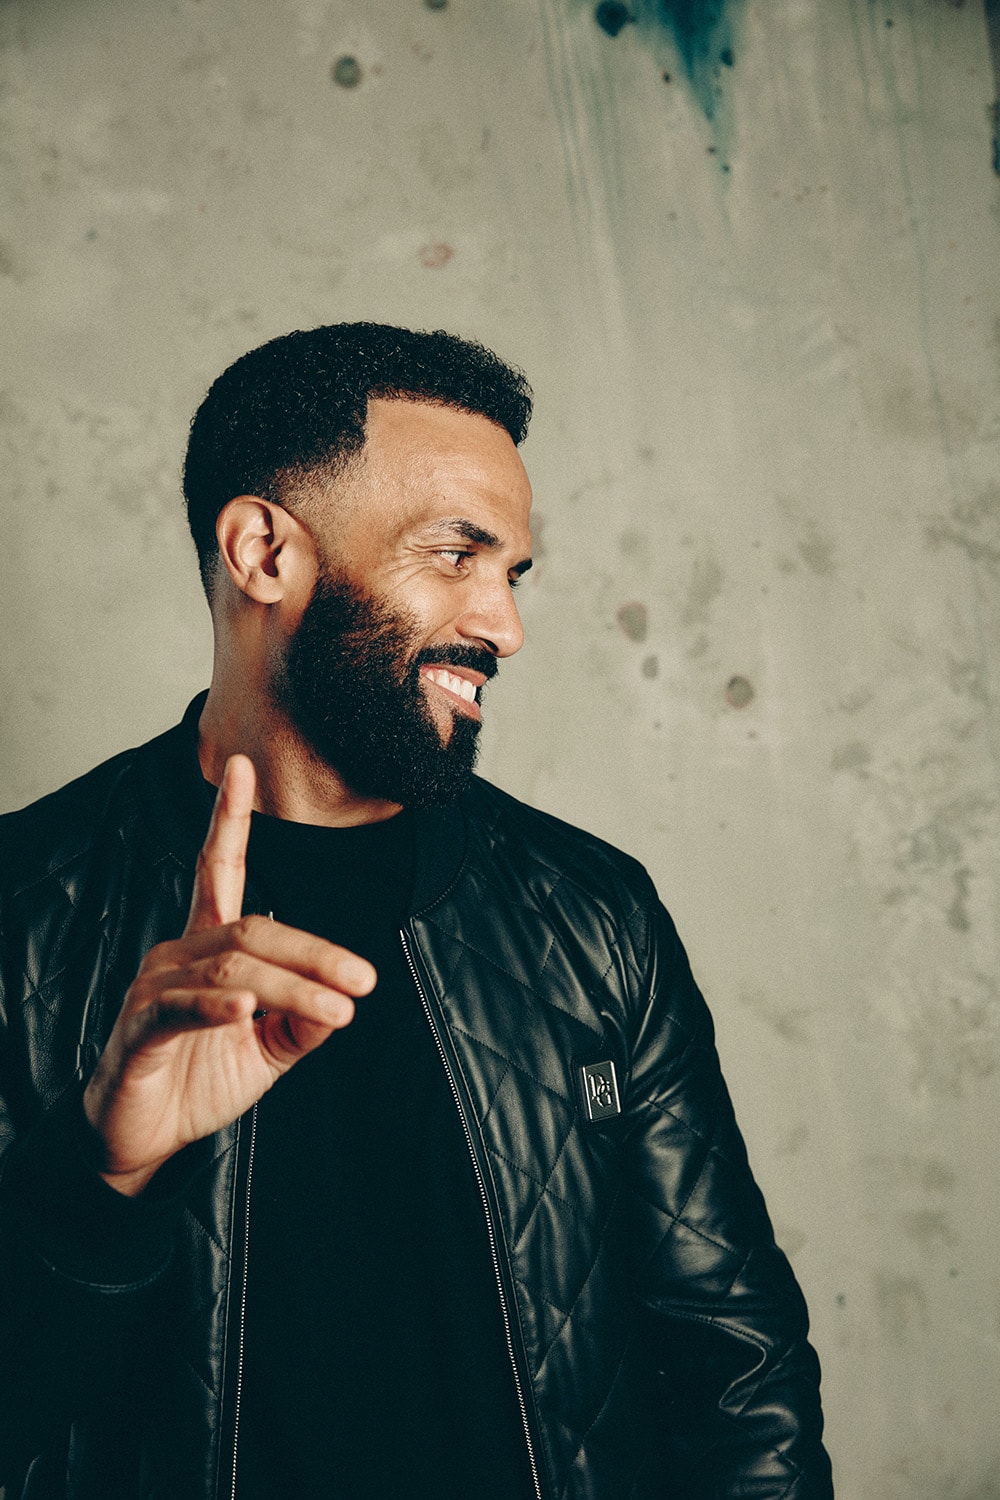 Interview with R&B and UK Garage Legend Craig David Ahead of His First North American Tour in Six Years